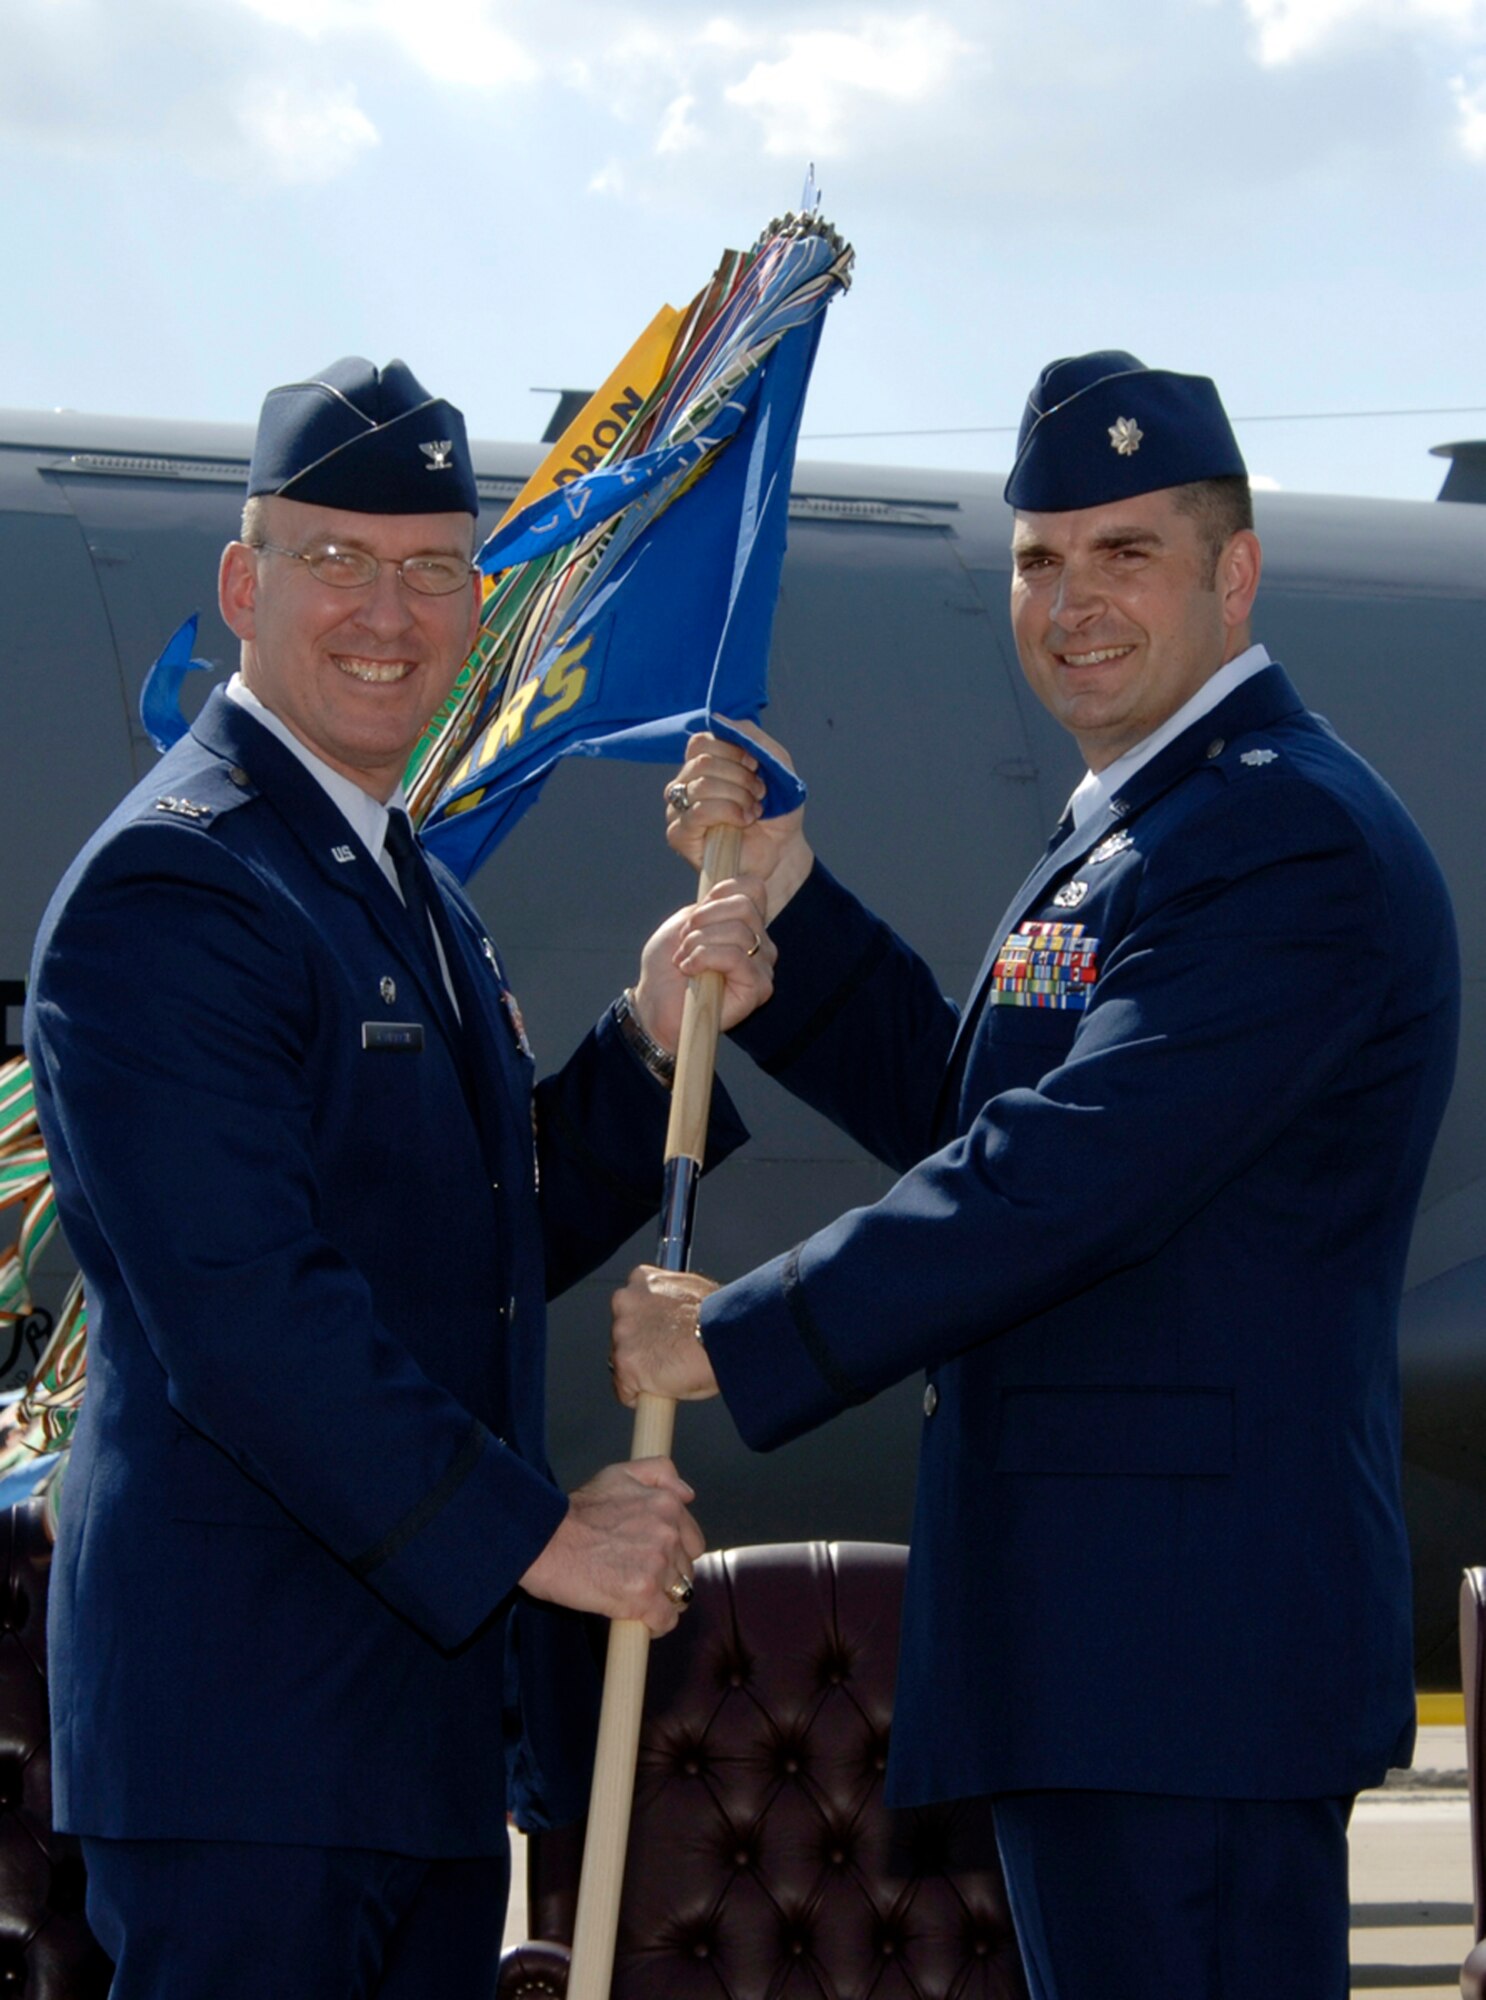 Col. Ray LaMarche, left, 22nd Operations Group commander, passes the 344th Air Refueling Wing guideon to Lt. Col. Eric Wohlrab during a change of command ceremony here May 11 during which Colonel Wohlrab assumed command of the 344th ARW. (Photo by Senior Airman Jamie Train)